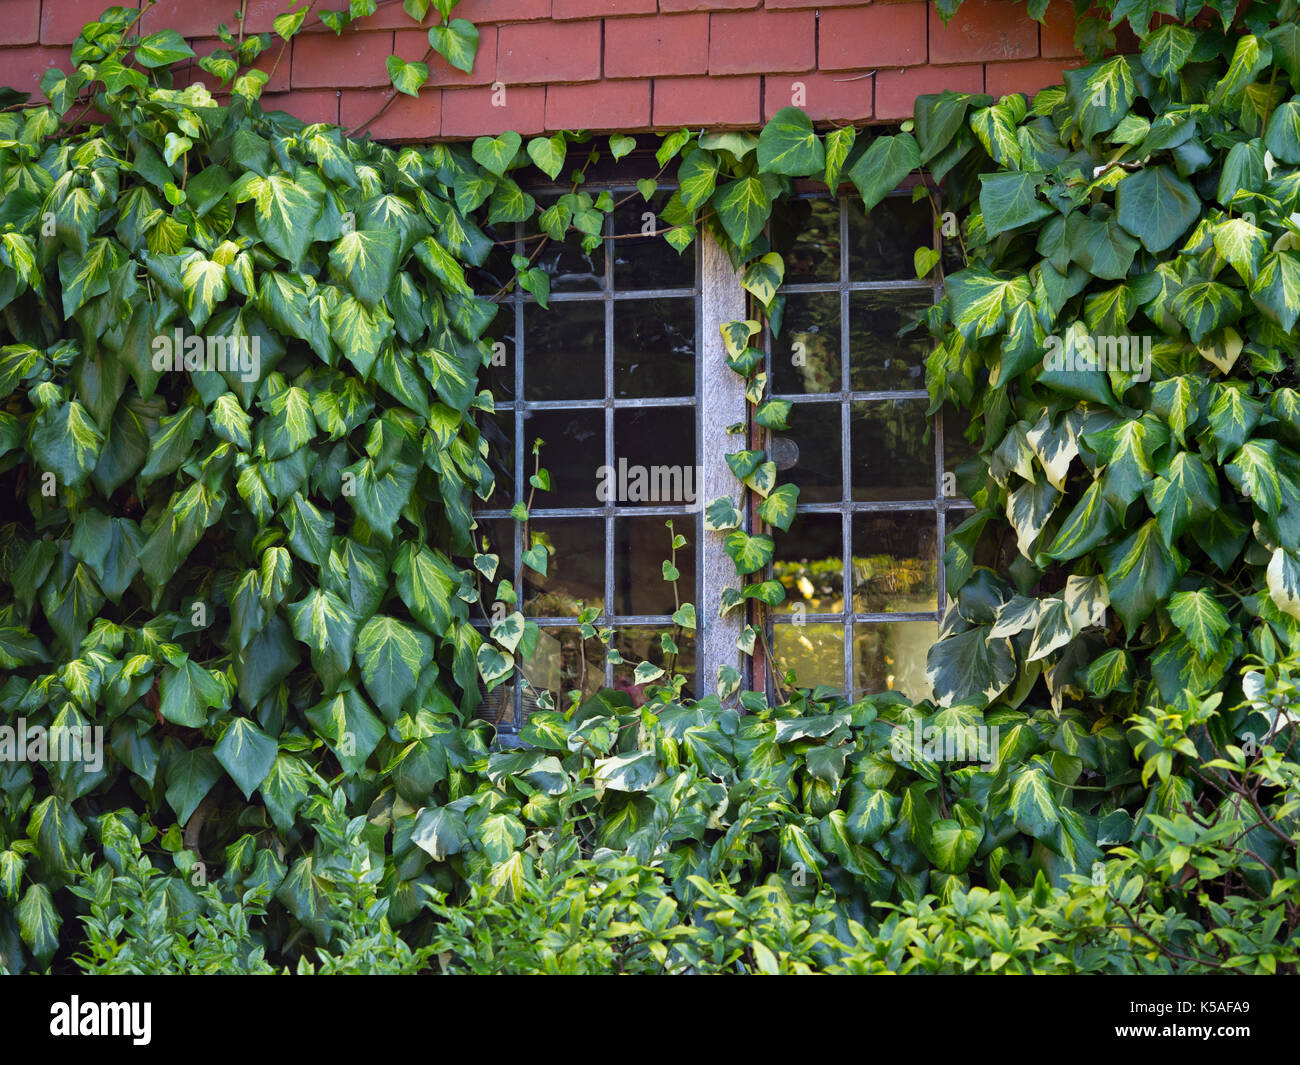 Ivy Hedera Variegata Araliaceae covering wall and window Stock Photo